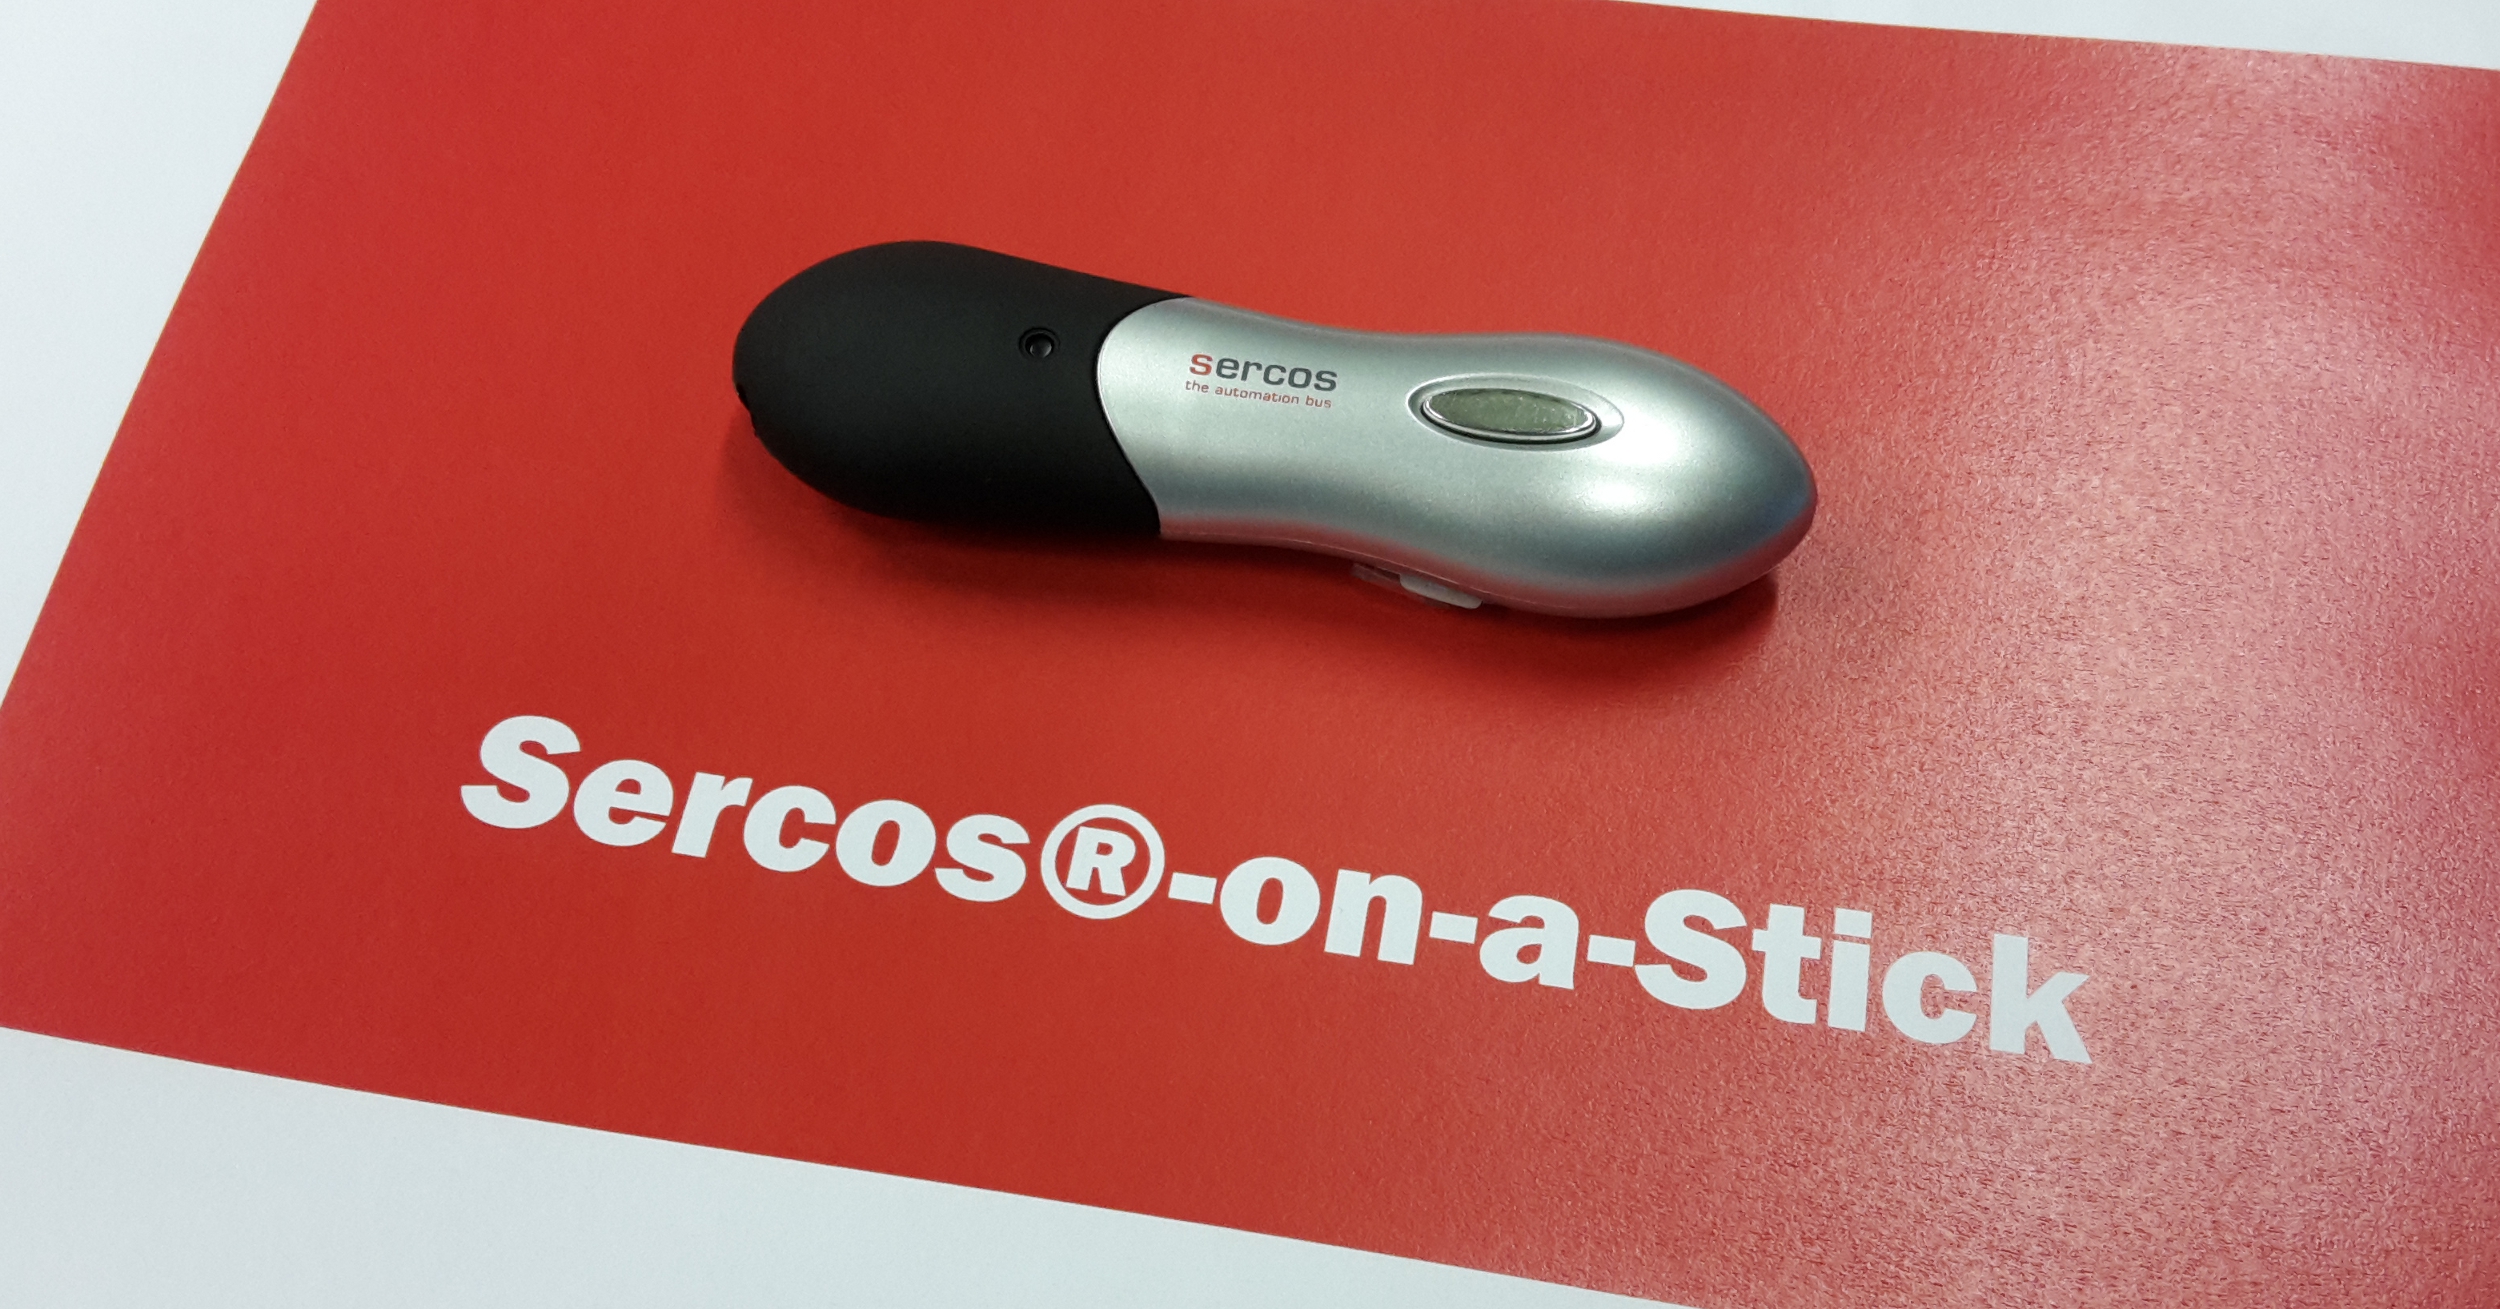 Sercos introduces Sercos-on-a-Stick live demo system